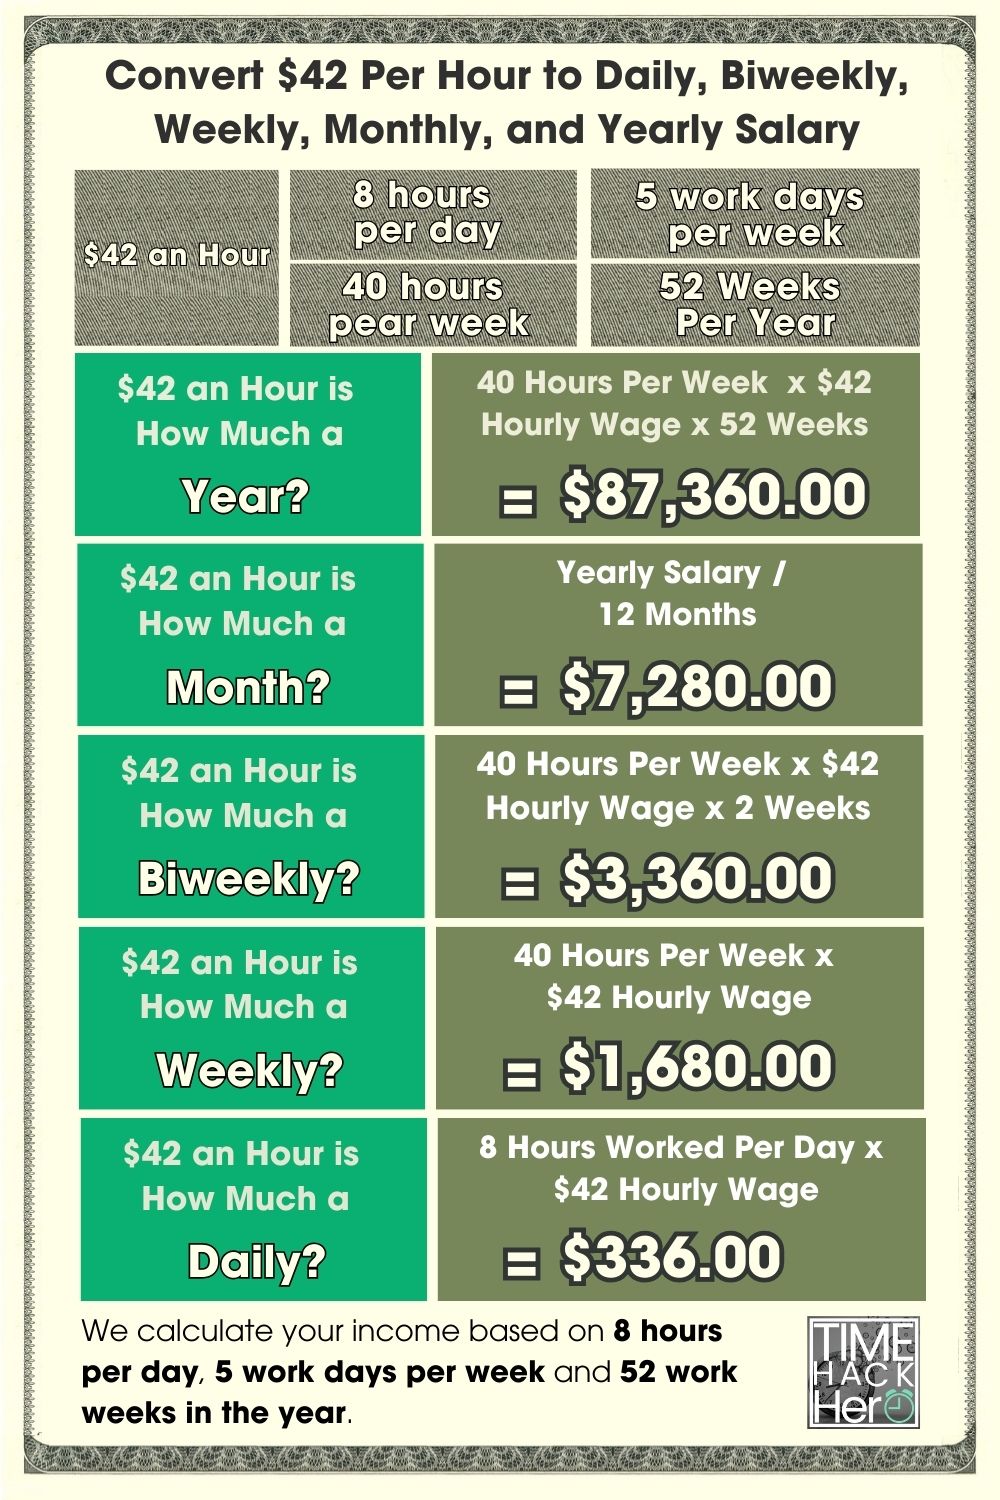 Convert $42 Per Hour to Daily, Biweekly, Weekly, Monthly, and Yearly Salary